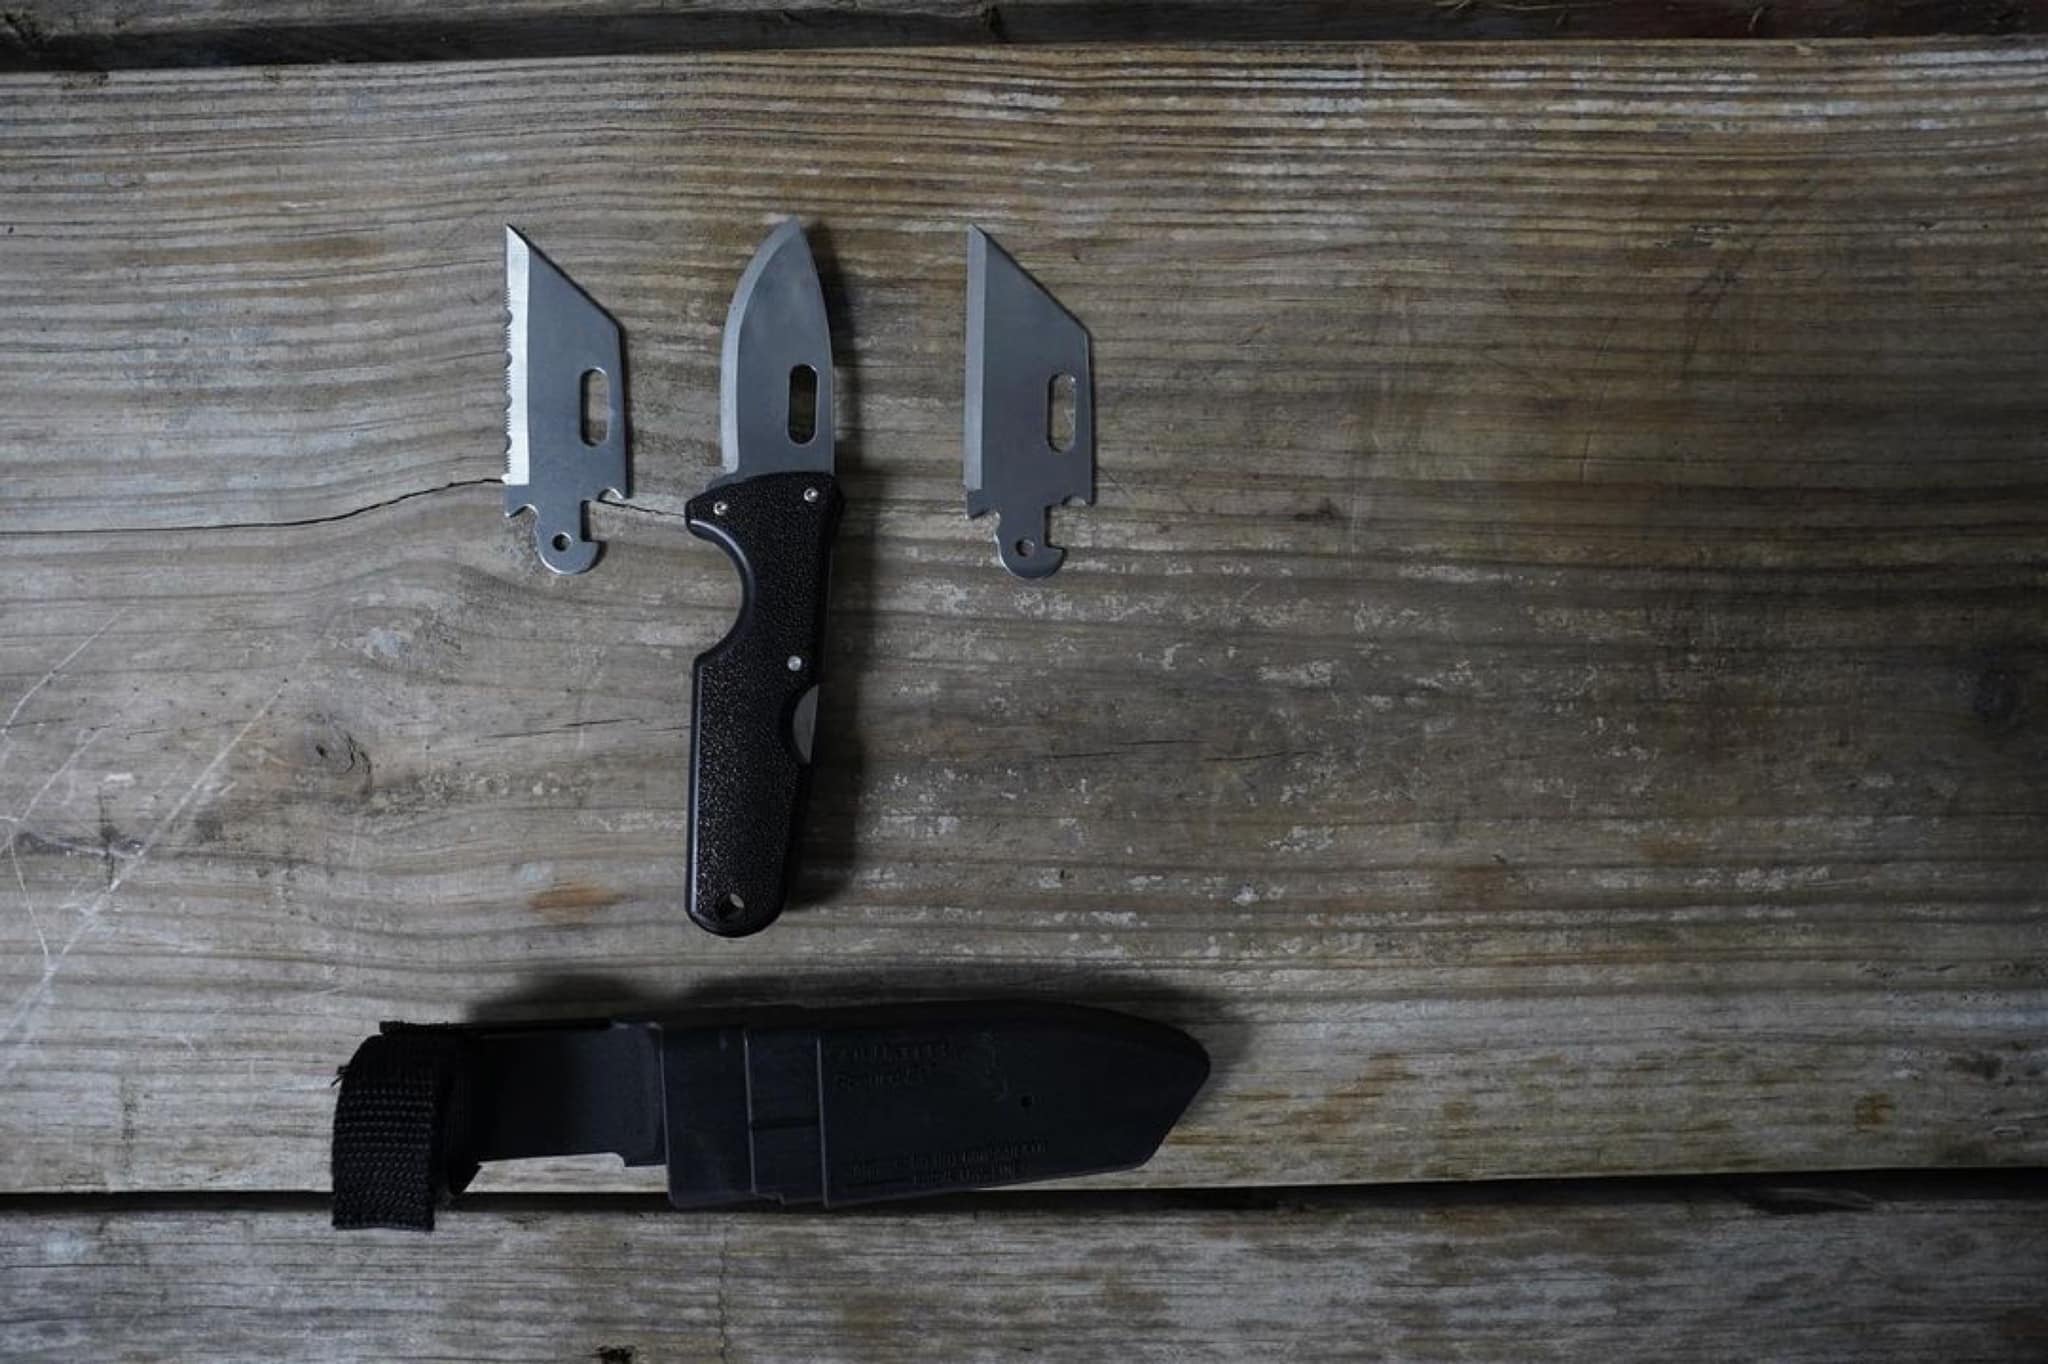 New Cold Steel Click-N-Cut Folding Knife Added to EDC Lineup